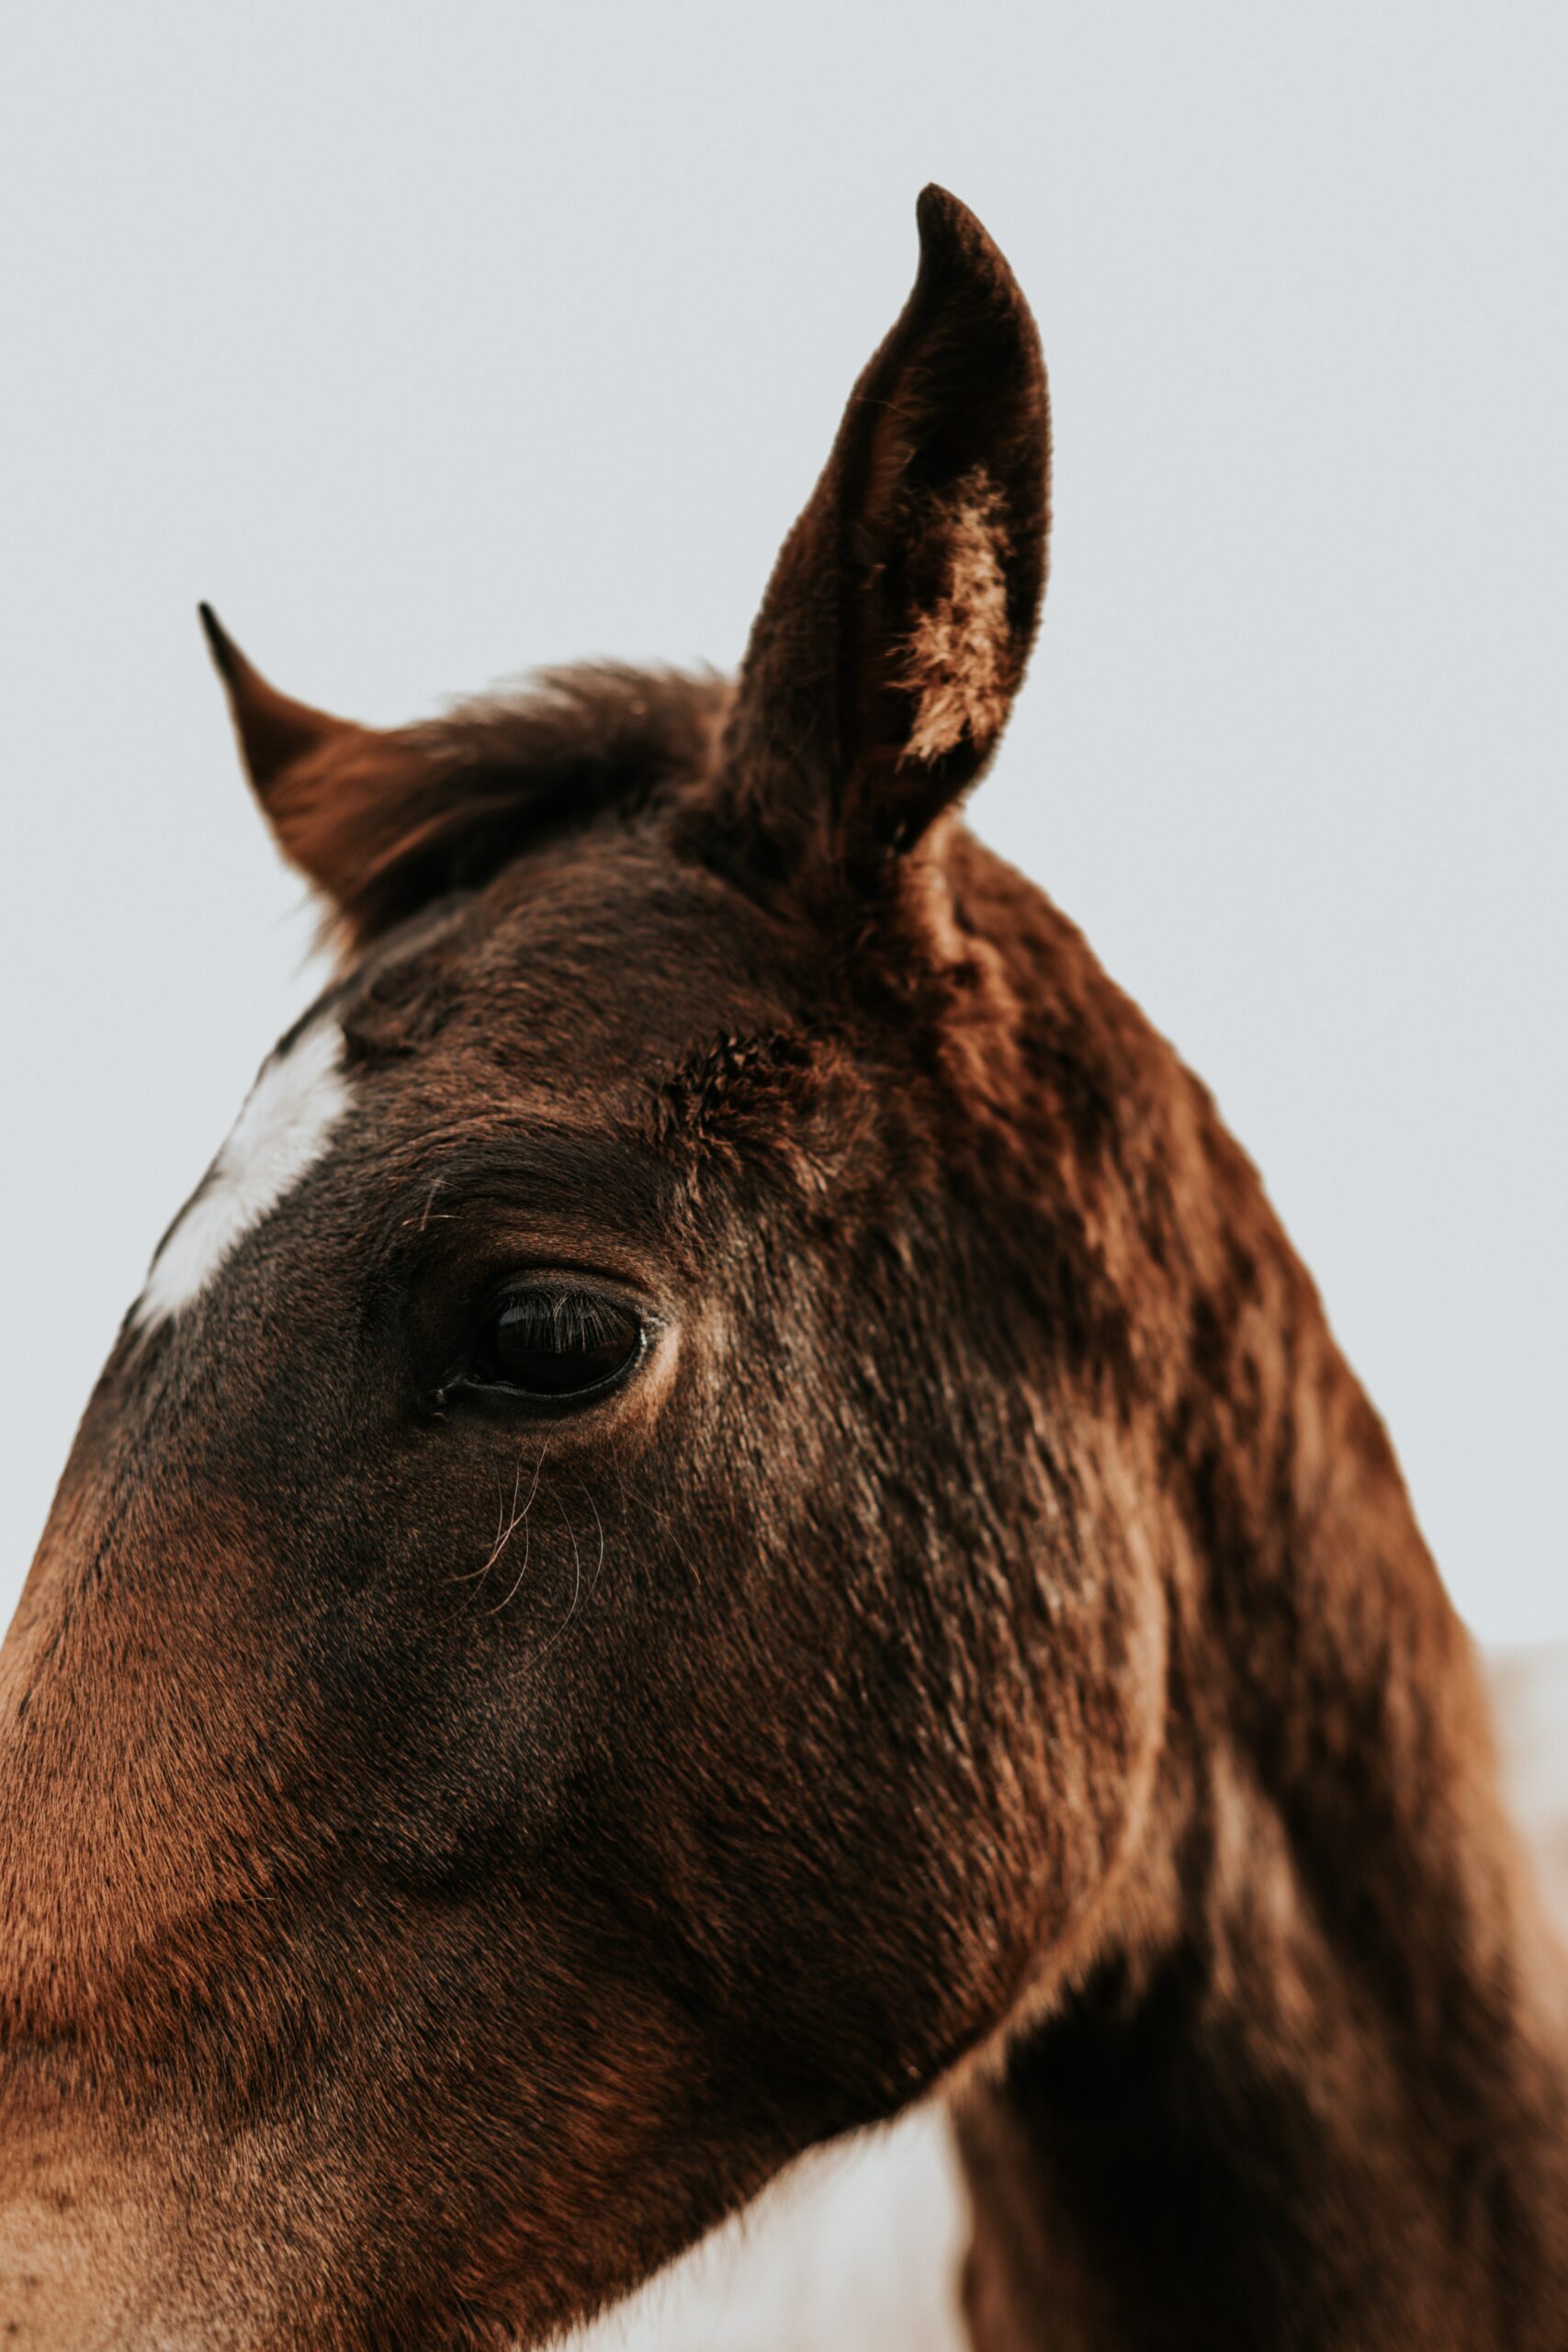 Do Horses Mirror Your Emotions?